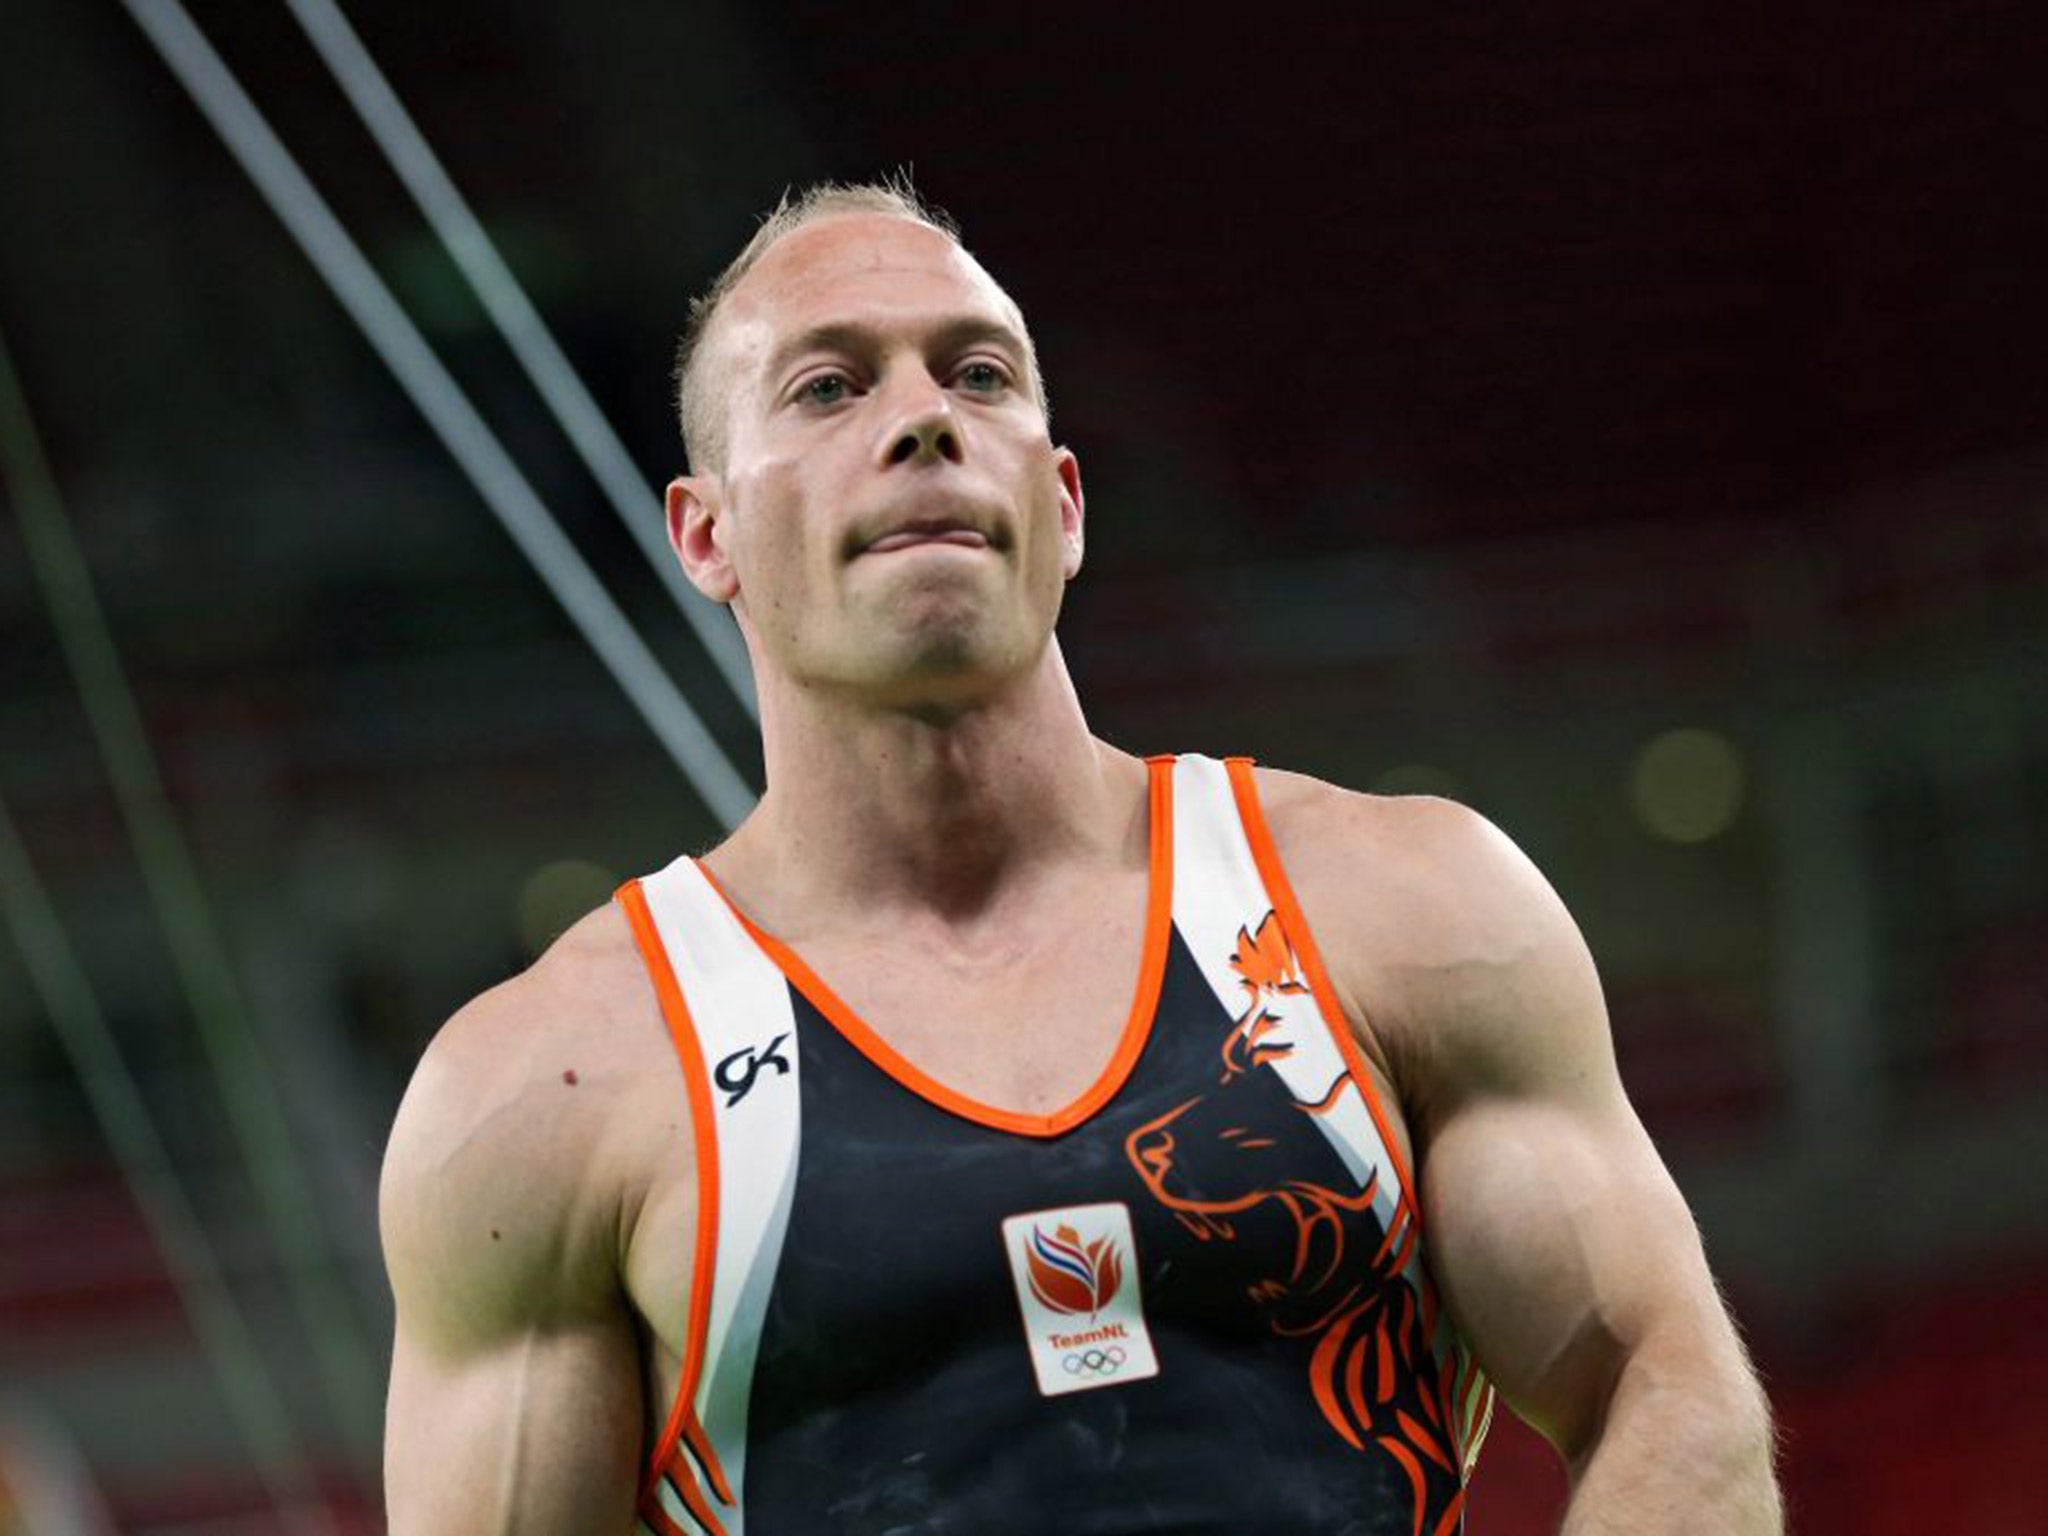 Yuri van Gelder has been sent home from the Olympics after going on a drink-fuelled night out